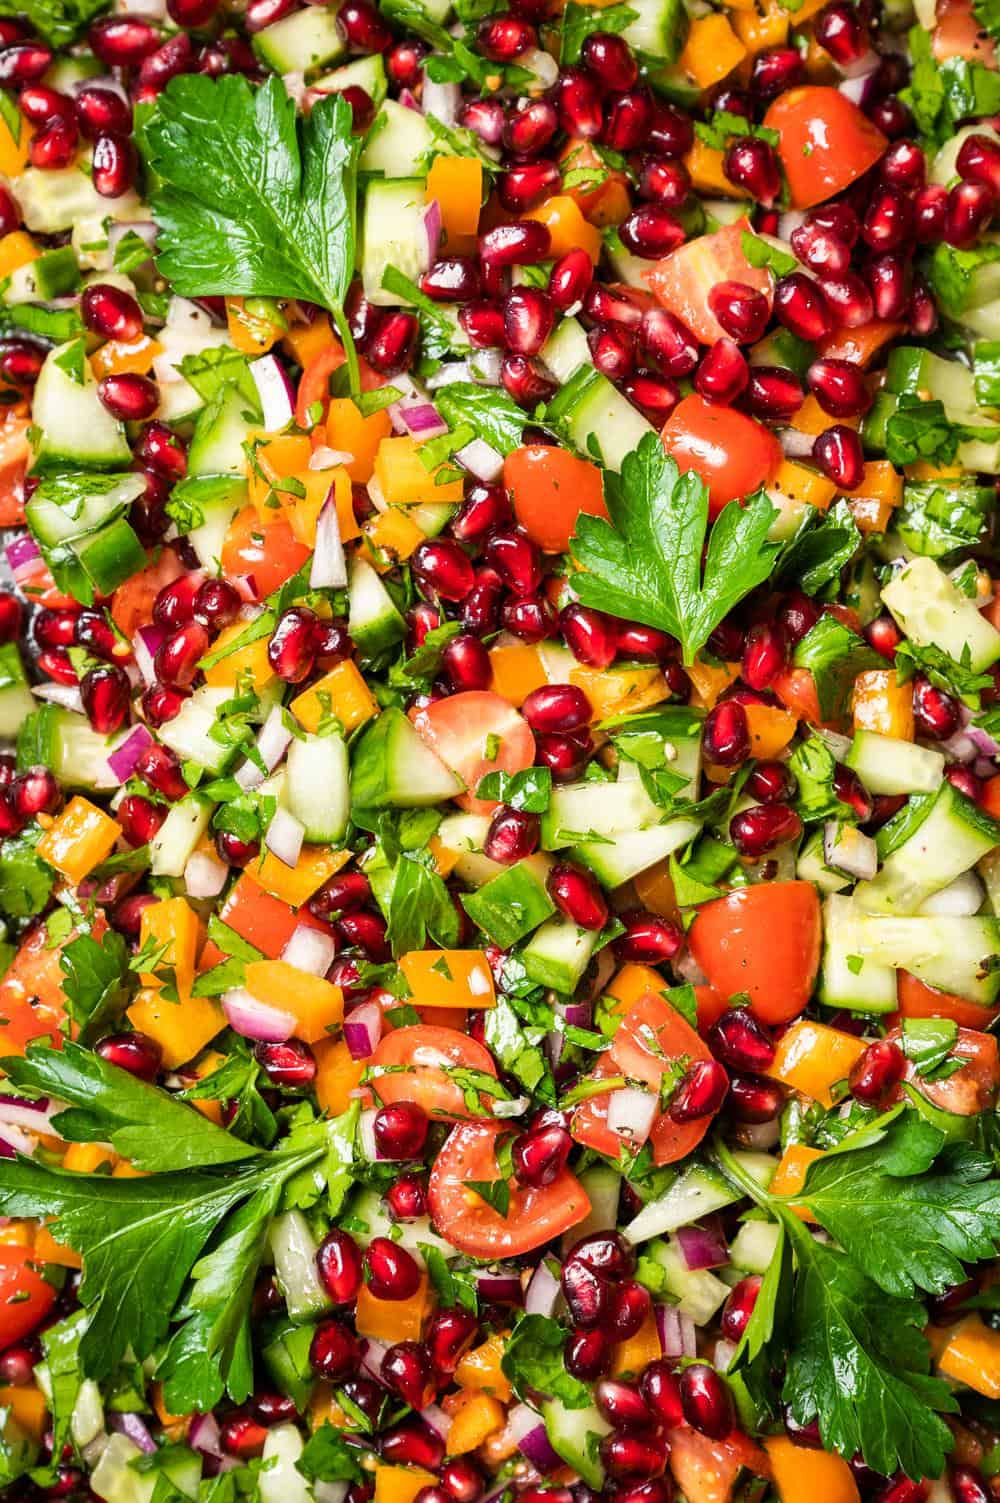 Details of a vibrant salad filled with California grown produce